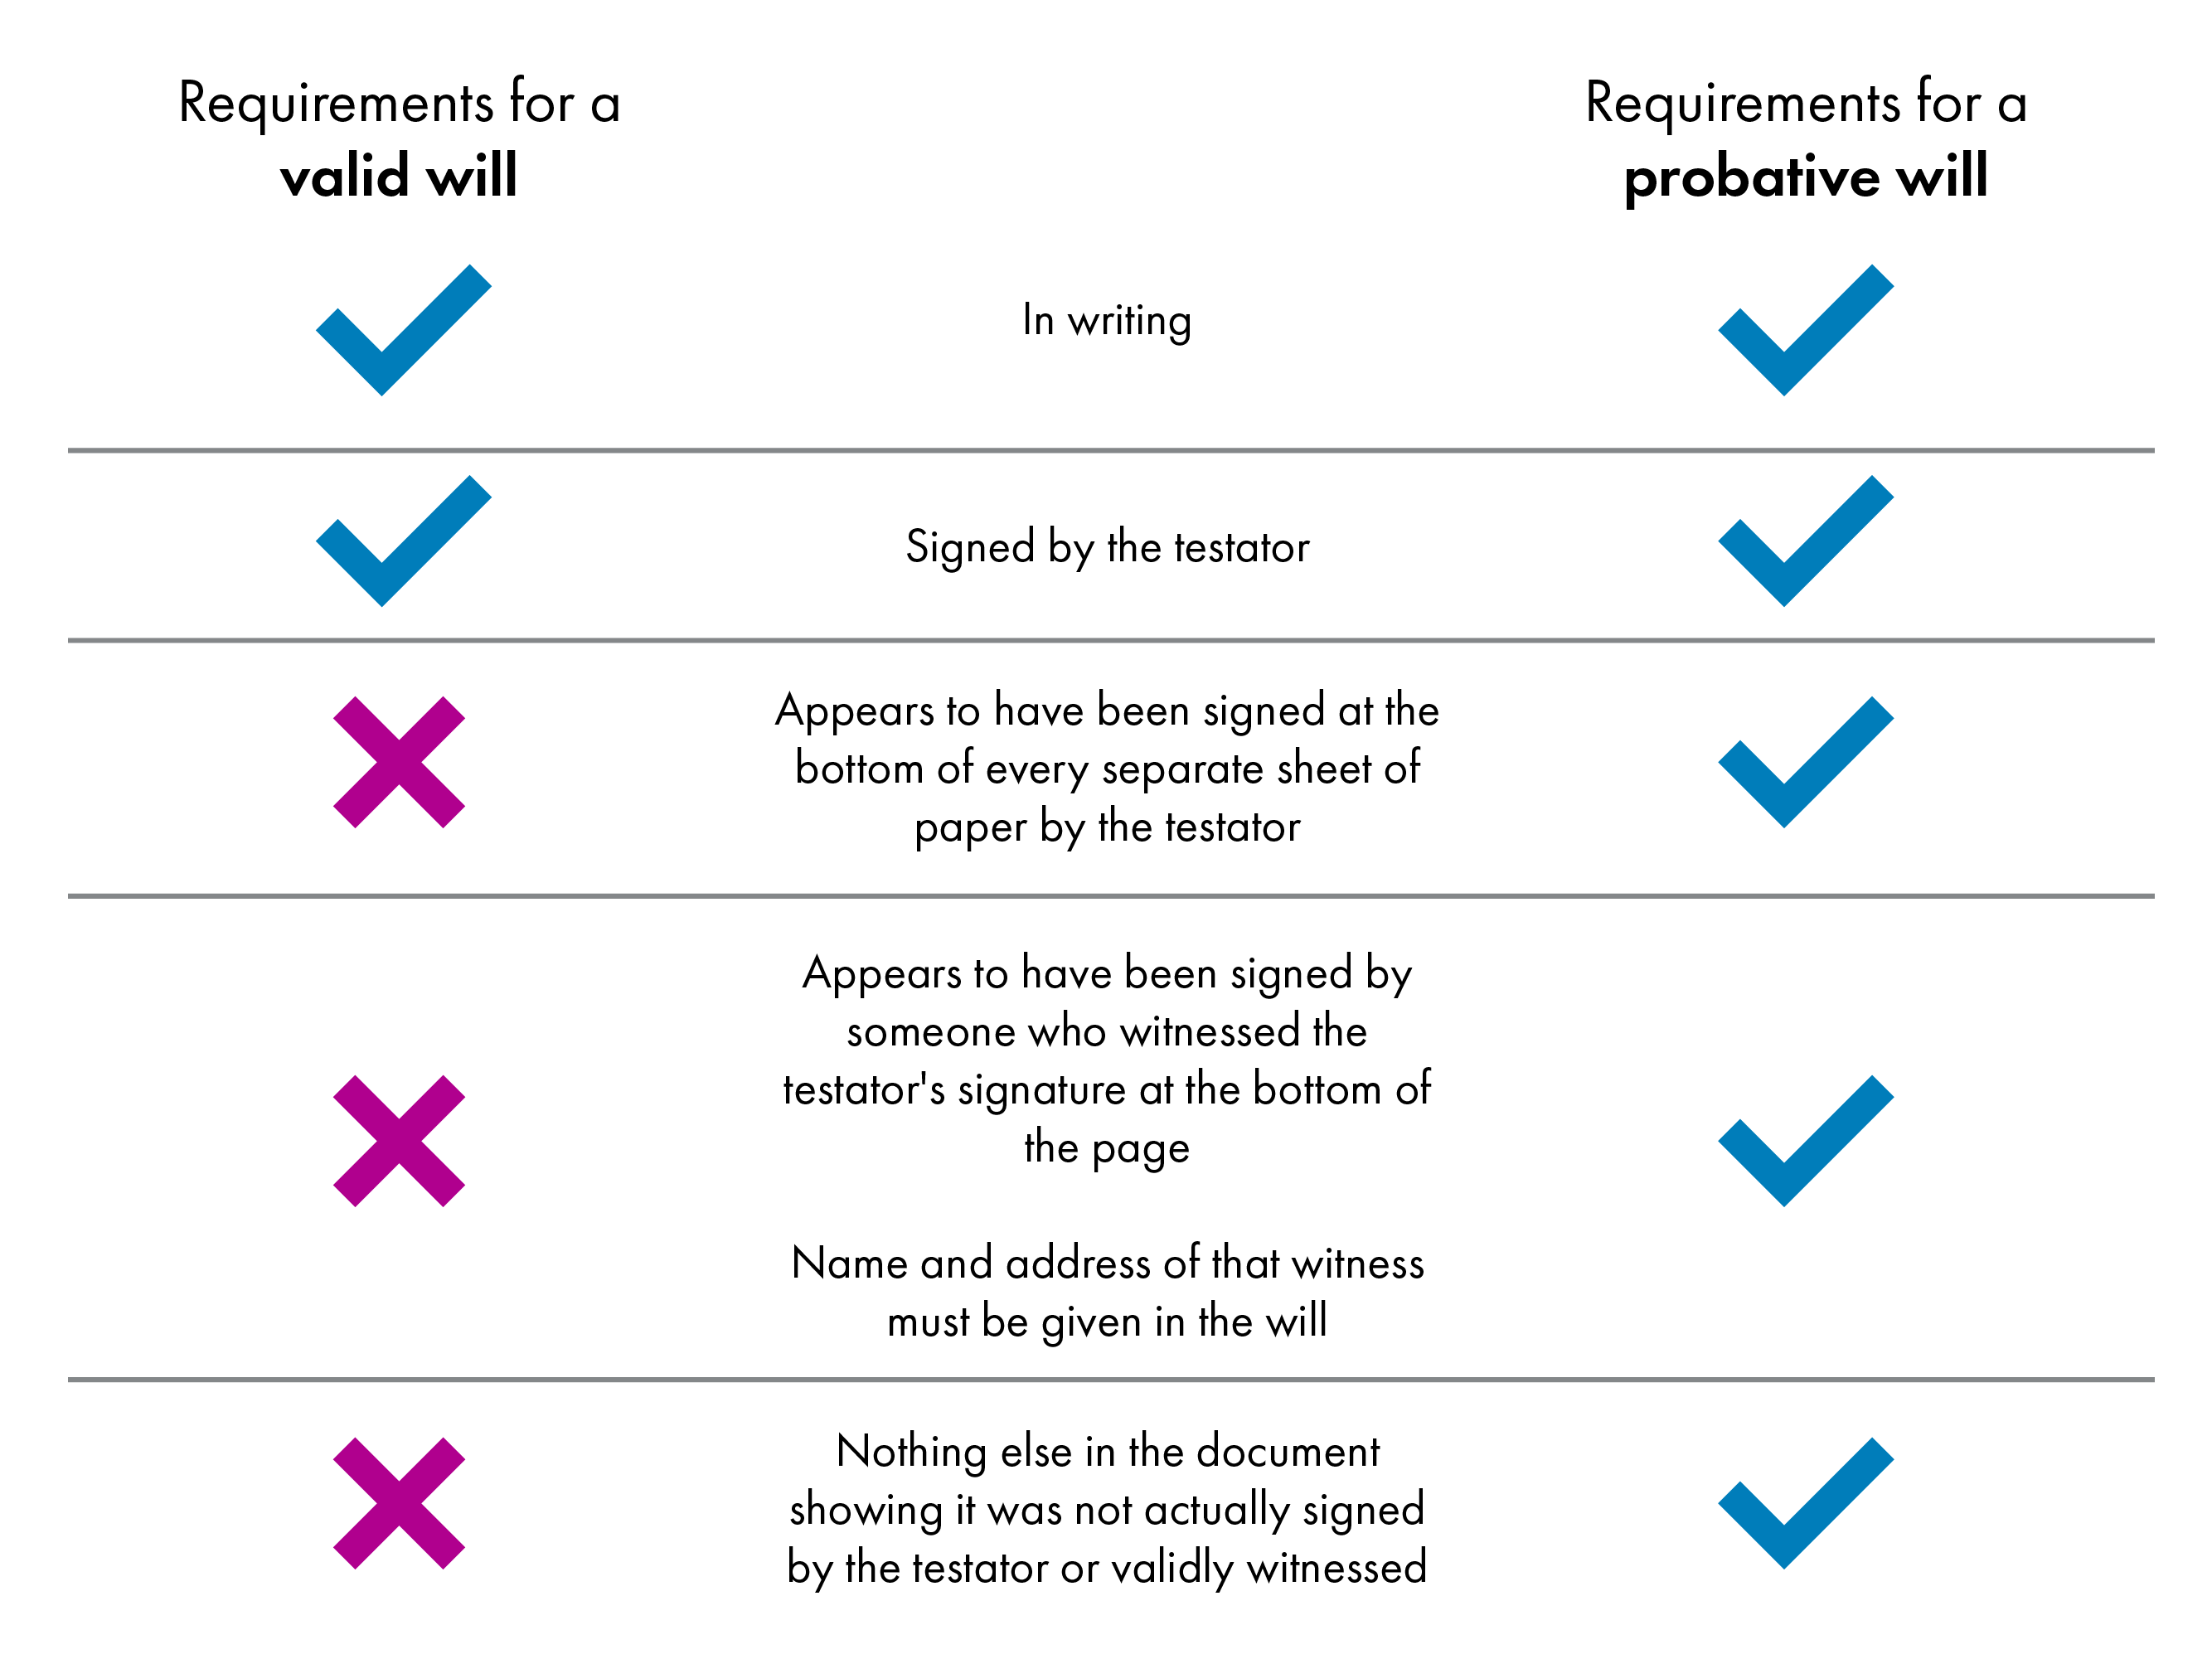 This diagram shows the two legal requirements which must be satisfied to create a valid will, as well as the additional requirements which must be satisfied to create a probative will